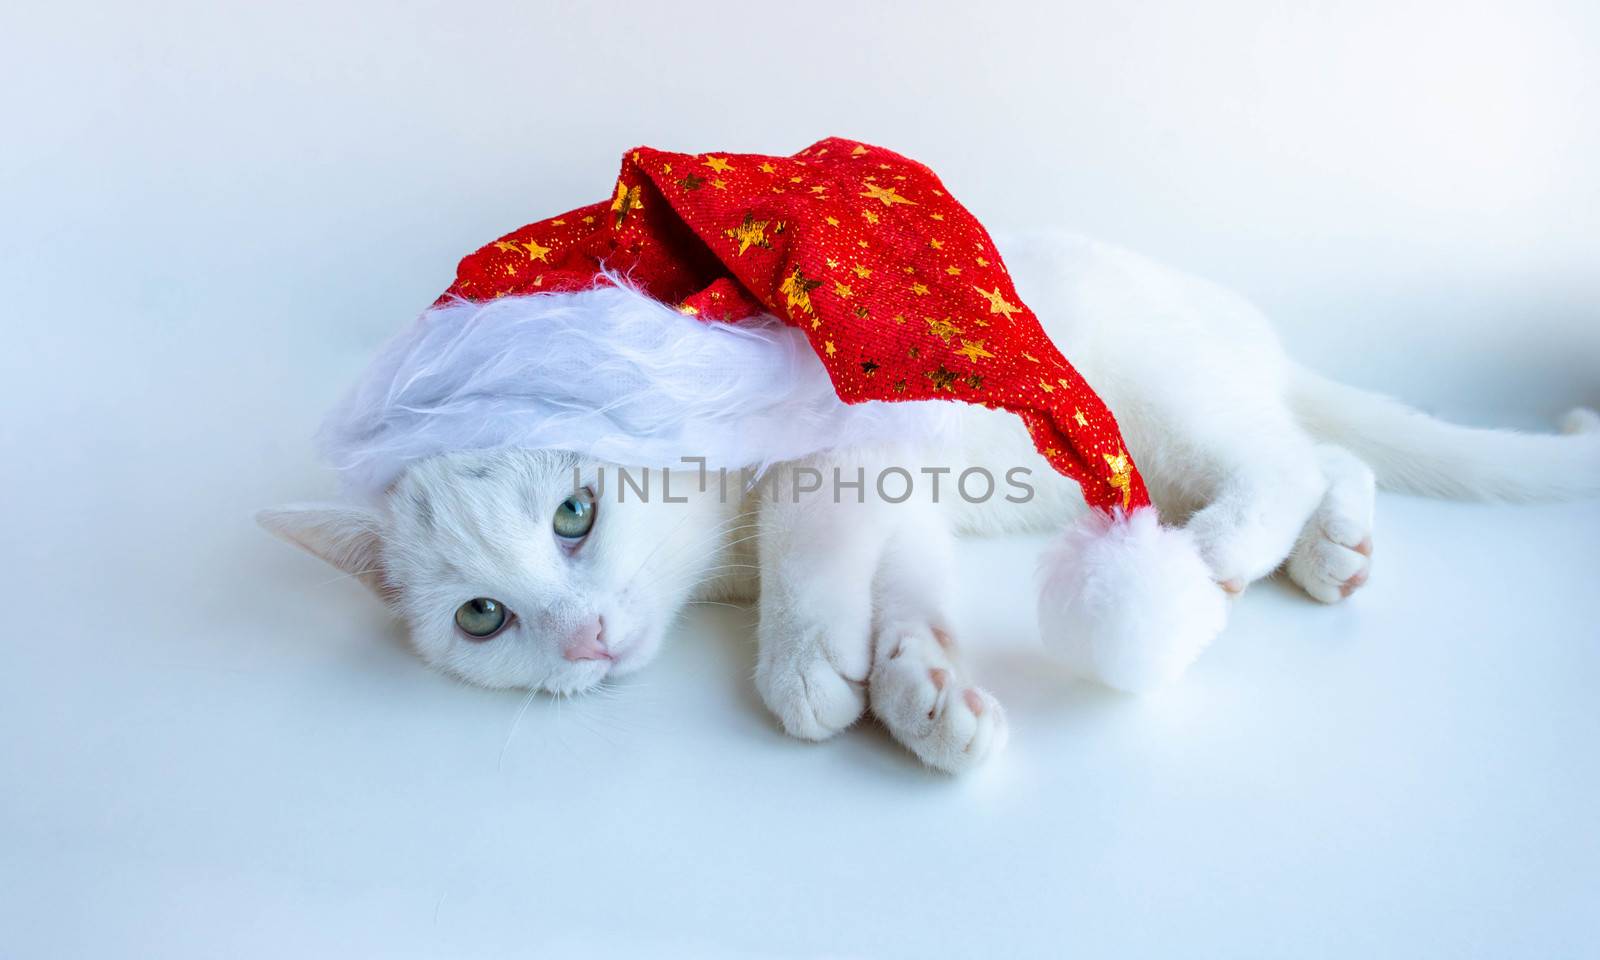 A white Christmas cat in a red Santa hat lies on a white background by lapushka62